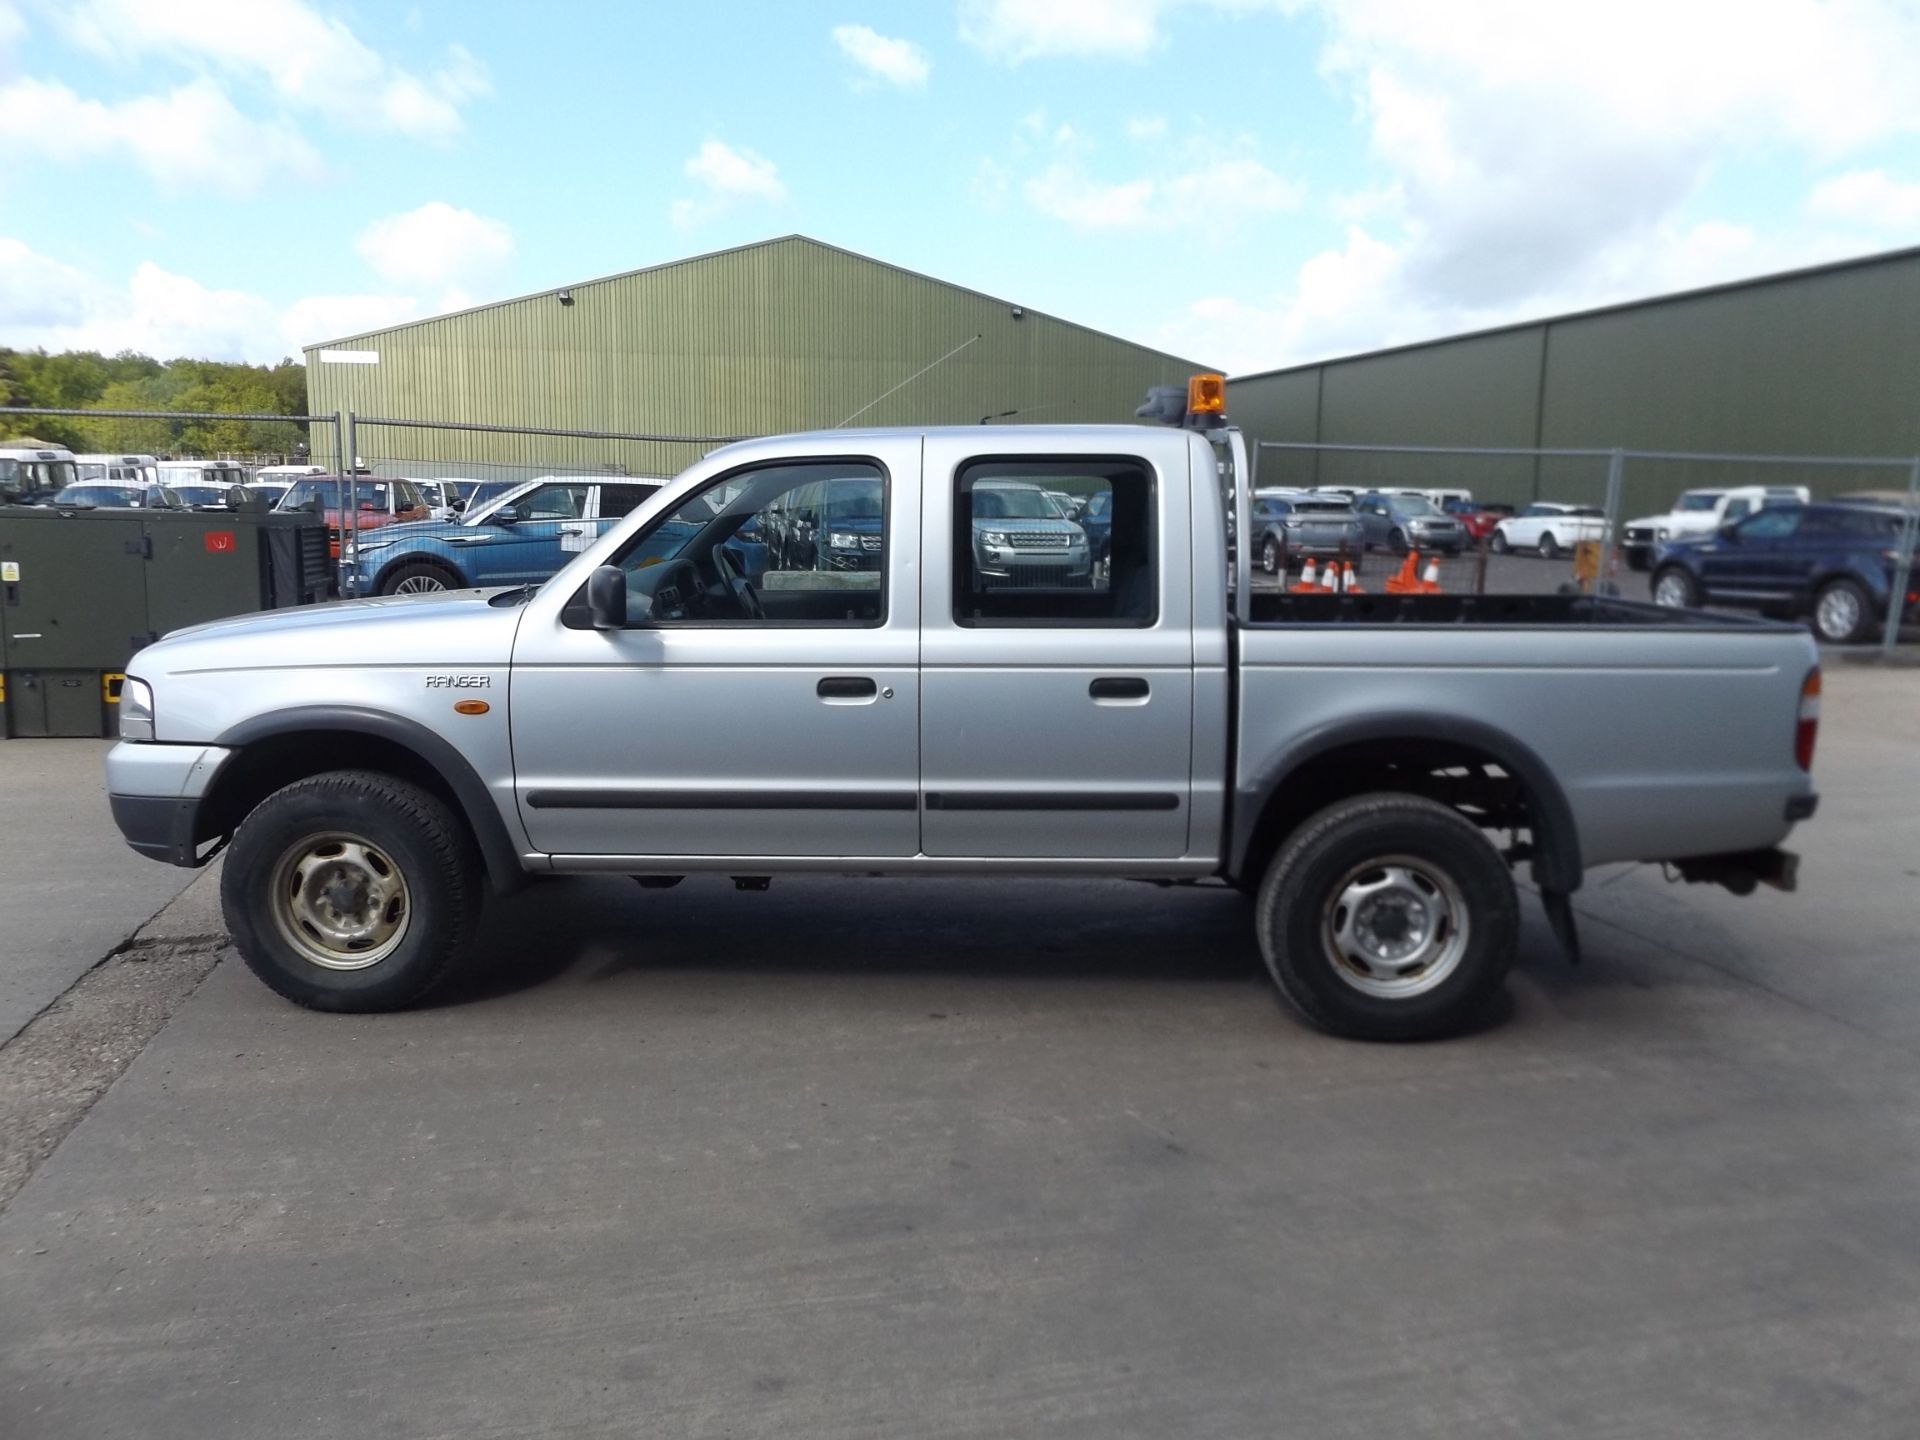 Ford Ranger Double cab pick up - Image 4 of 15